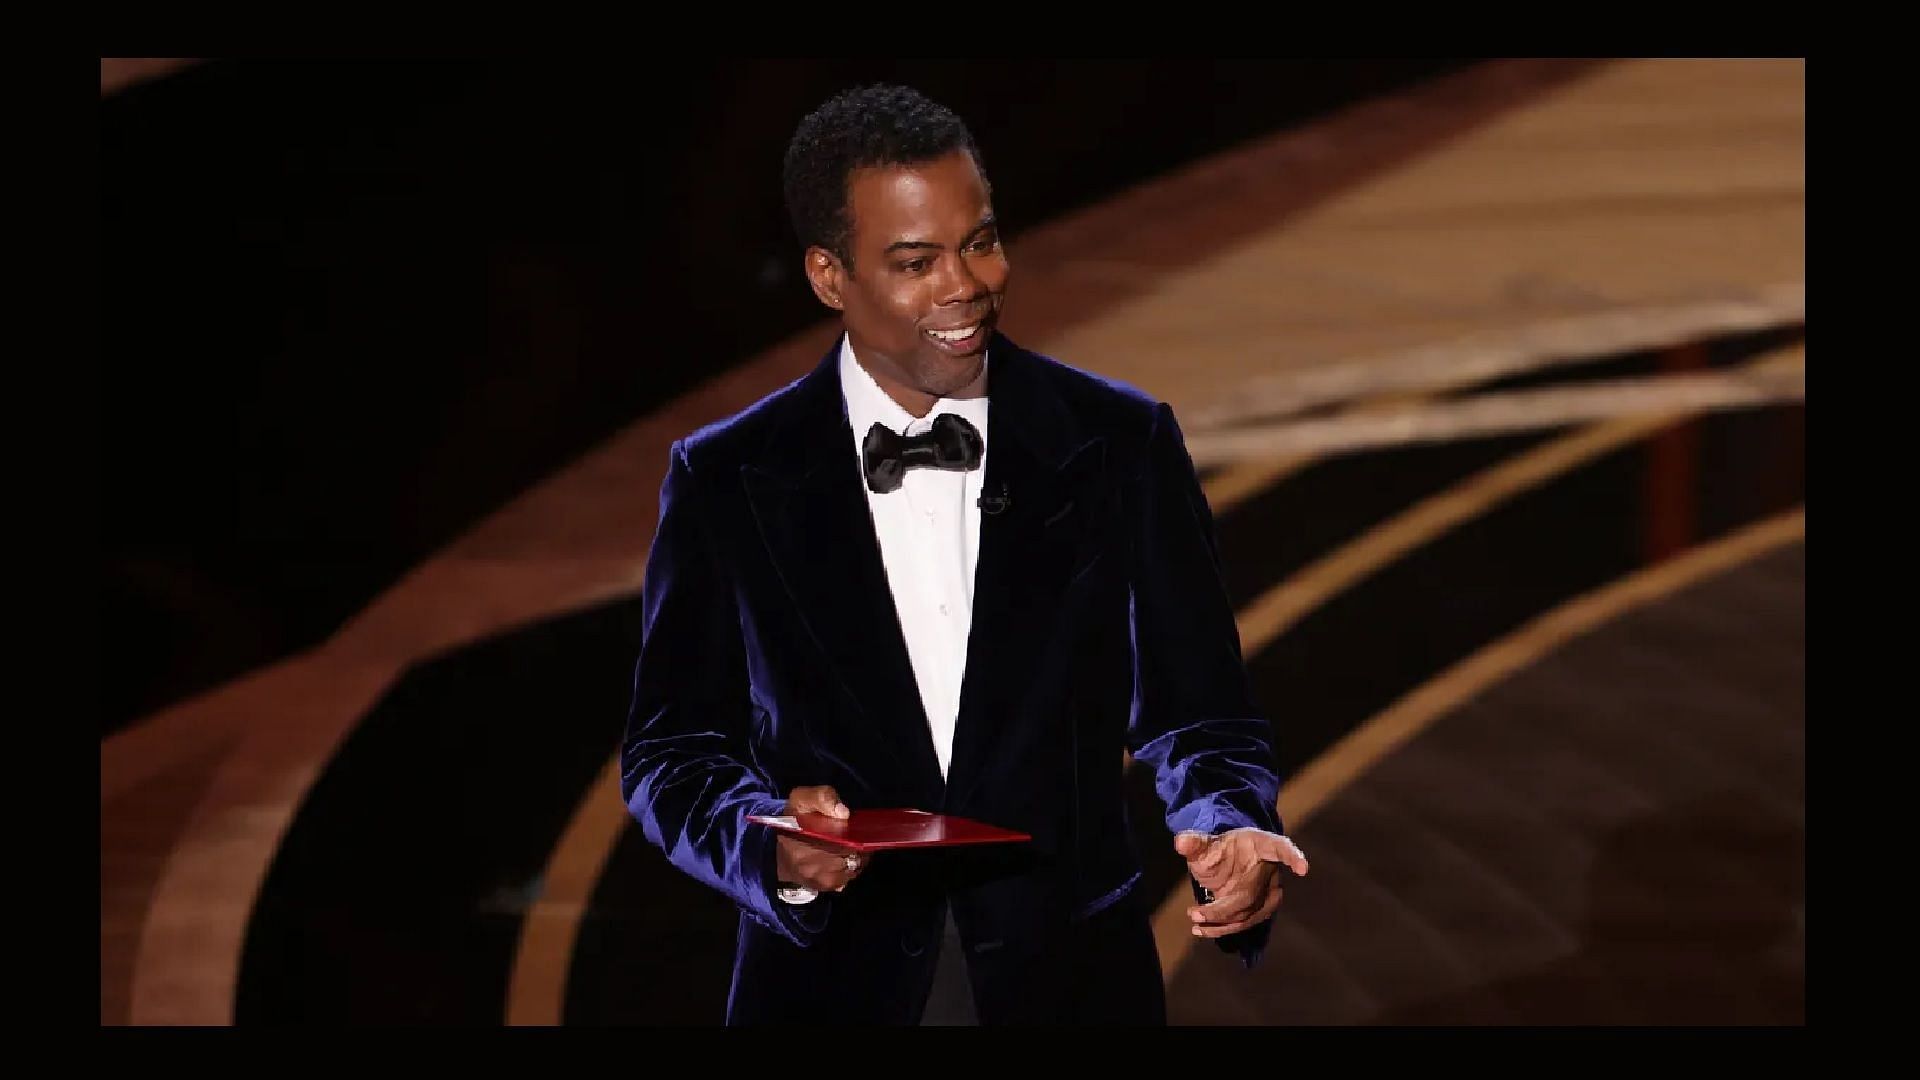 How much did Chris Rock get paid for Netflix special? Selective Outrage